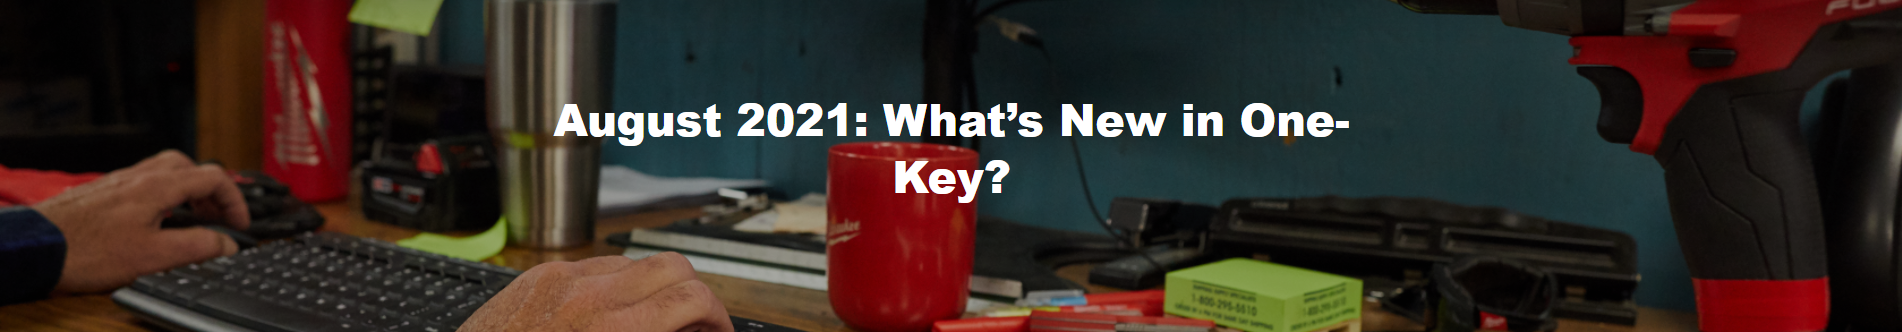 August 2021: What’s New in One-Key?